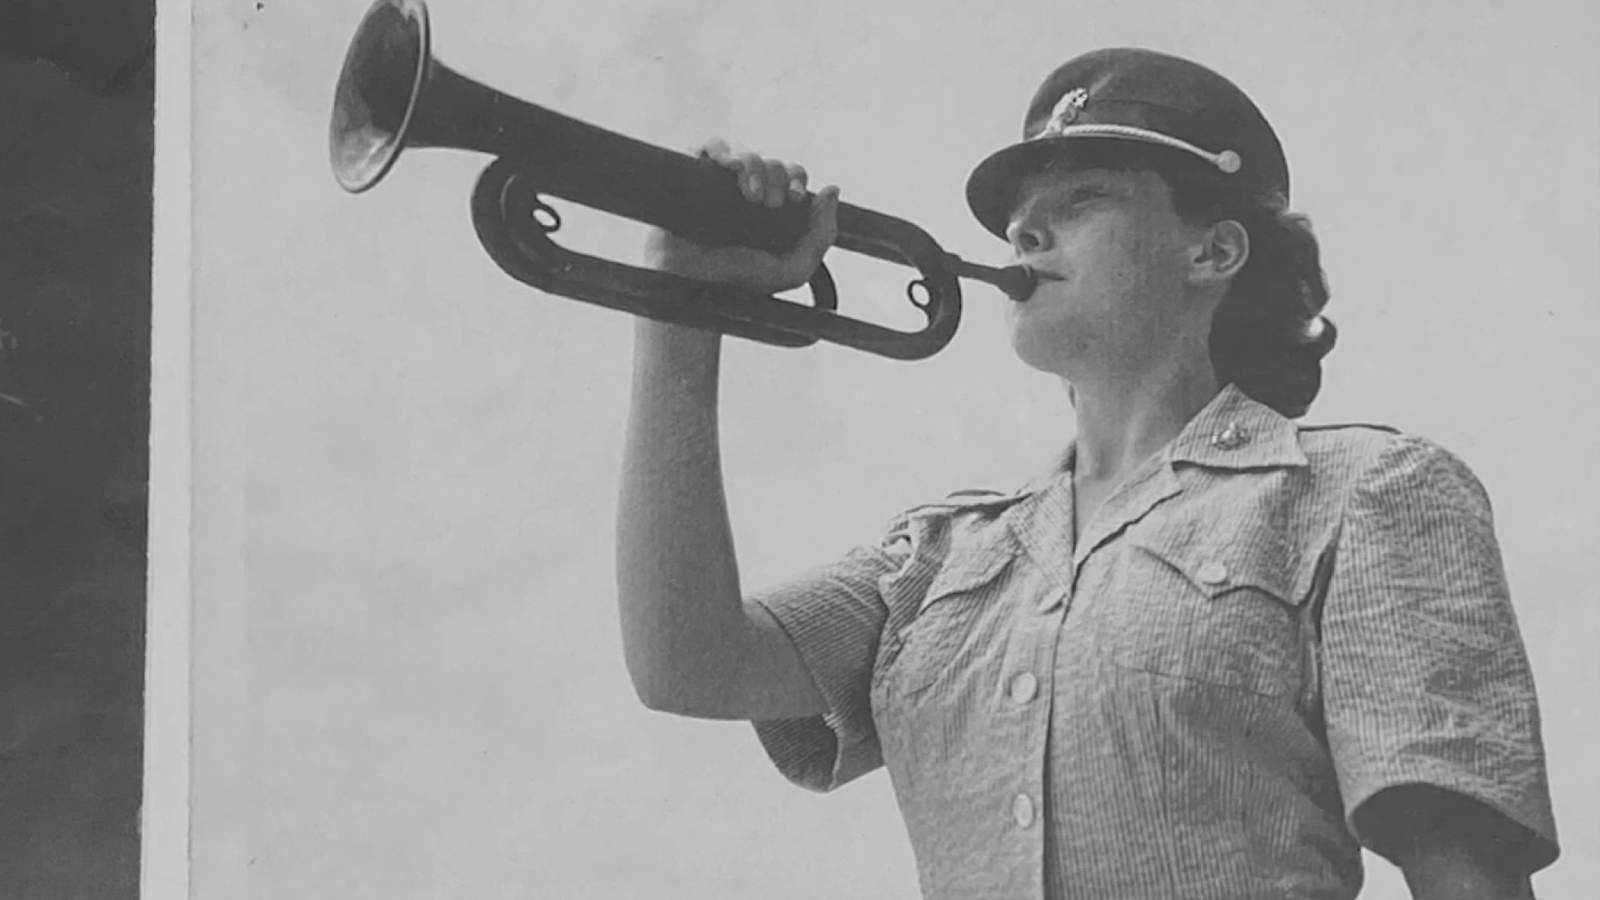 ‘Whenever there is a need we show up:’ WWII bugle player among first women to join US Marine Corps